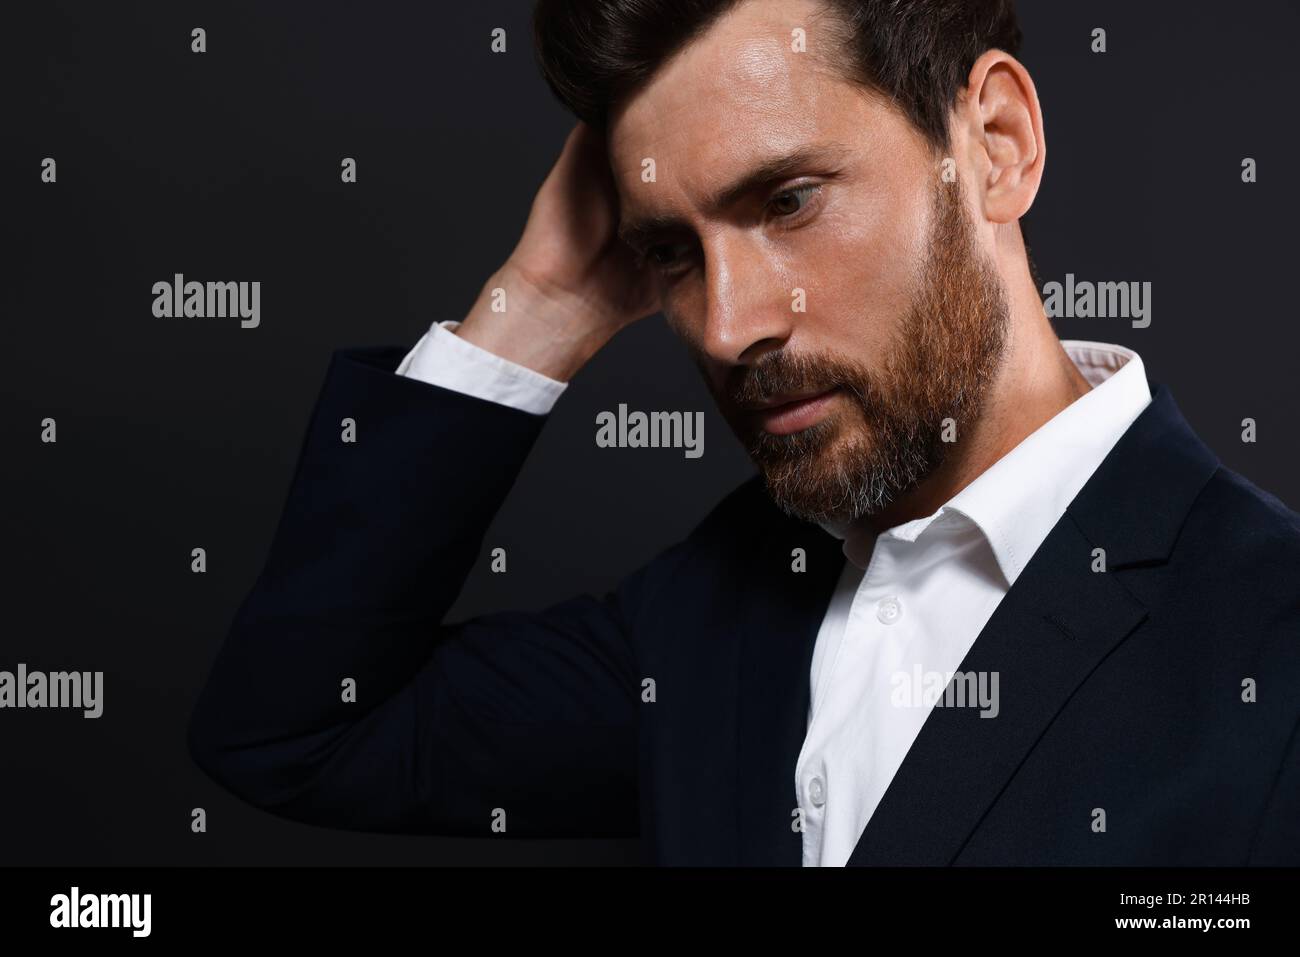 Handsome bearded man looking down on black background Stock Photo